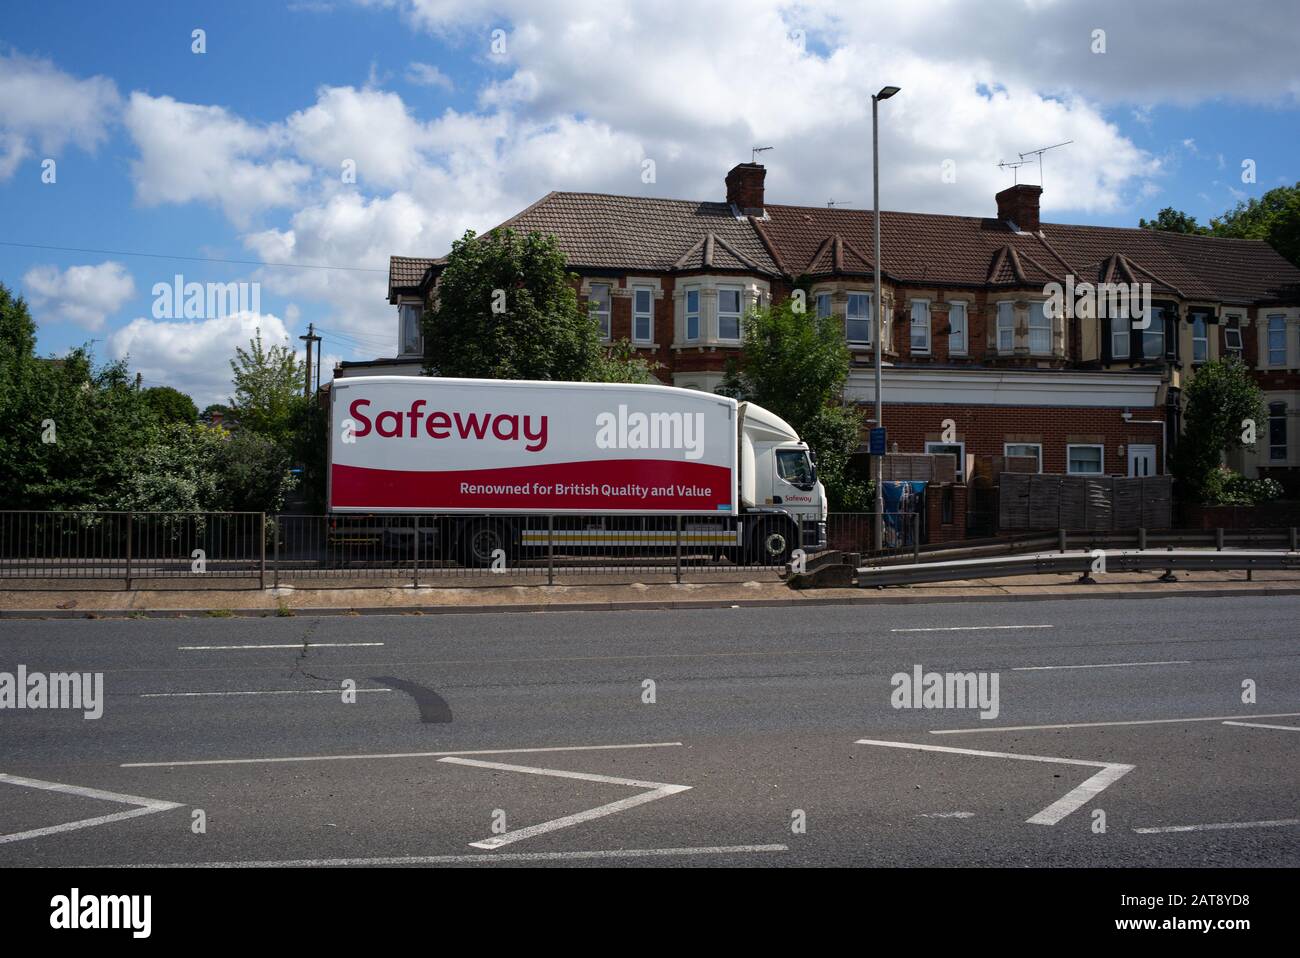 Safeway supermarket lorry carrying the logo renowned for British quality and value driving along a road with houses behind. Stock Photo